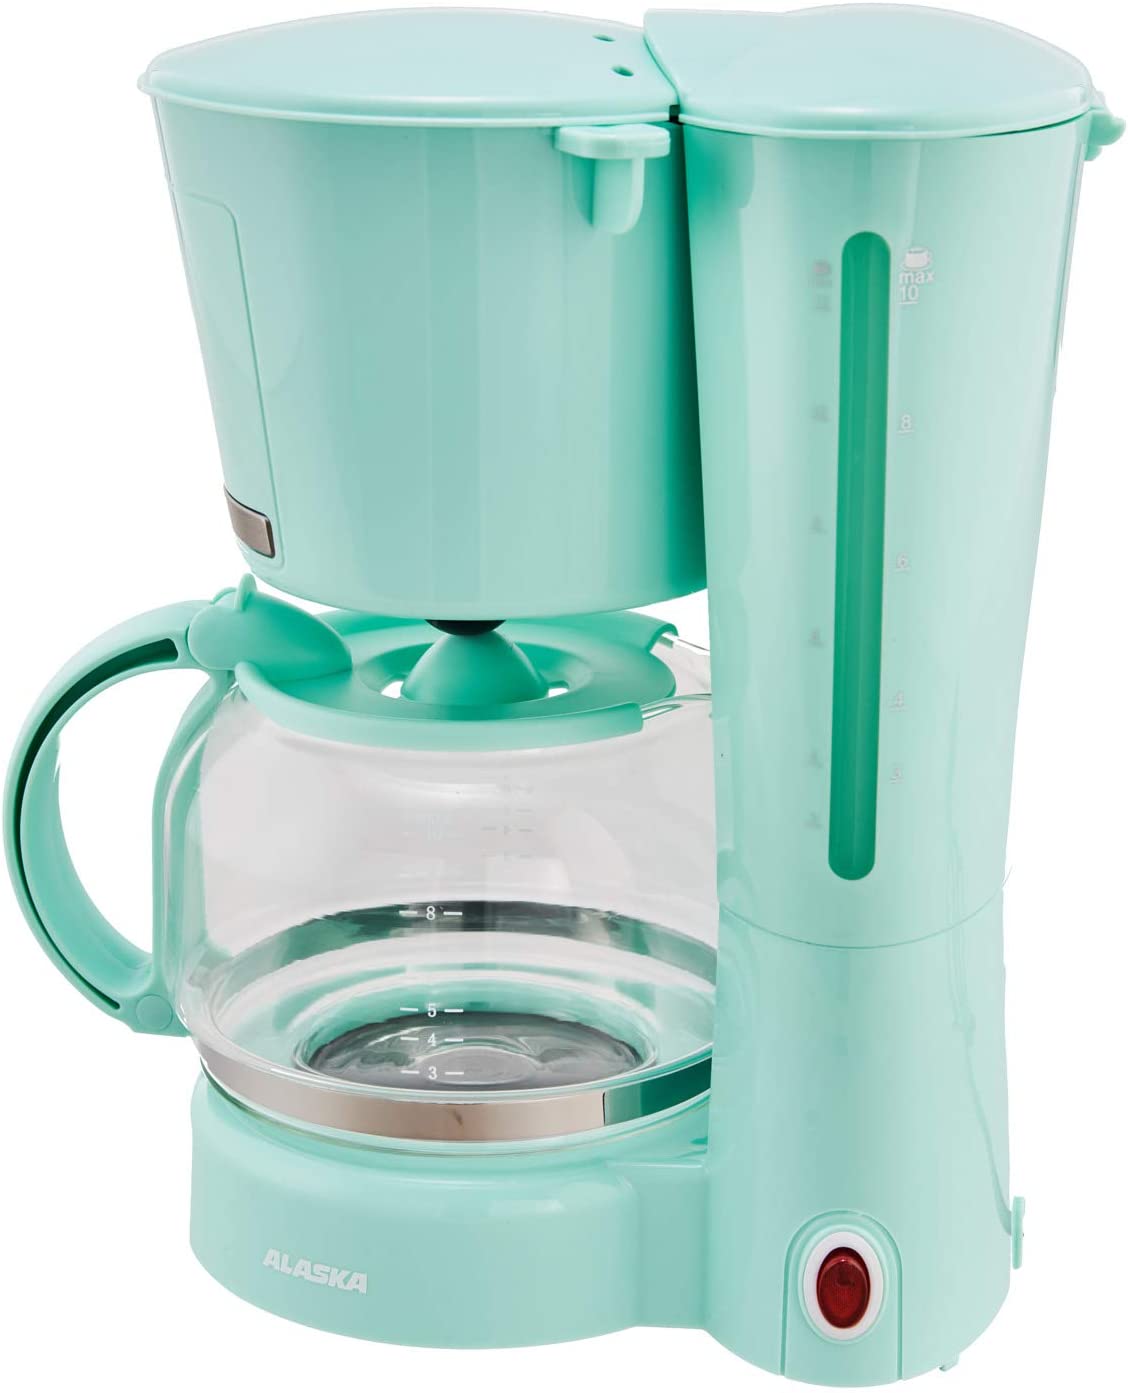 Alaska CM 2209 DSG Coffee Machine | Up to 12 Cups | 870 Watt | Removable Filter Insert | Filter Size 1 x 4 | Drip Stop Function | Water Level Indicator | Keep Warm Function | Operating Control Light (Green)